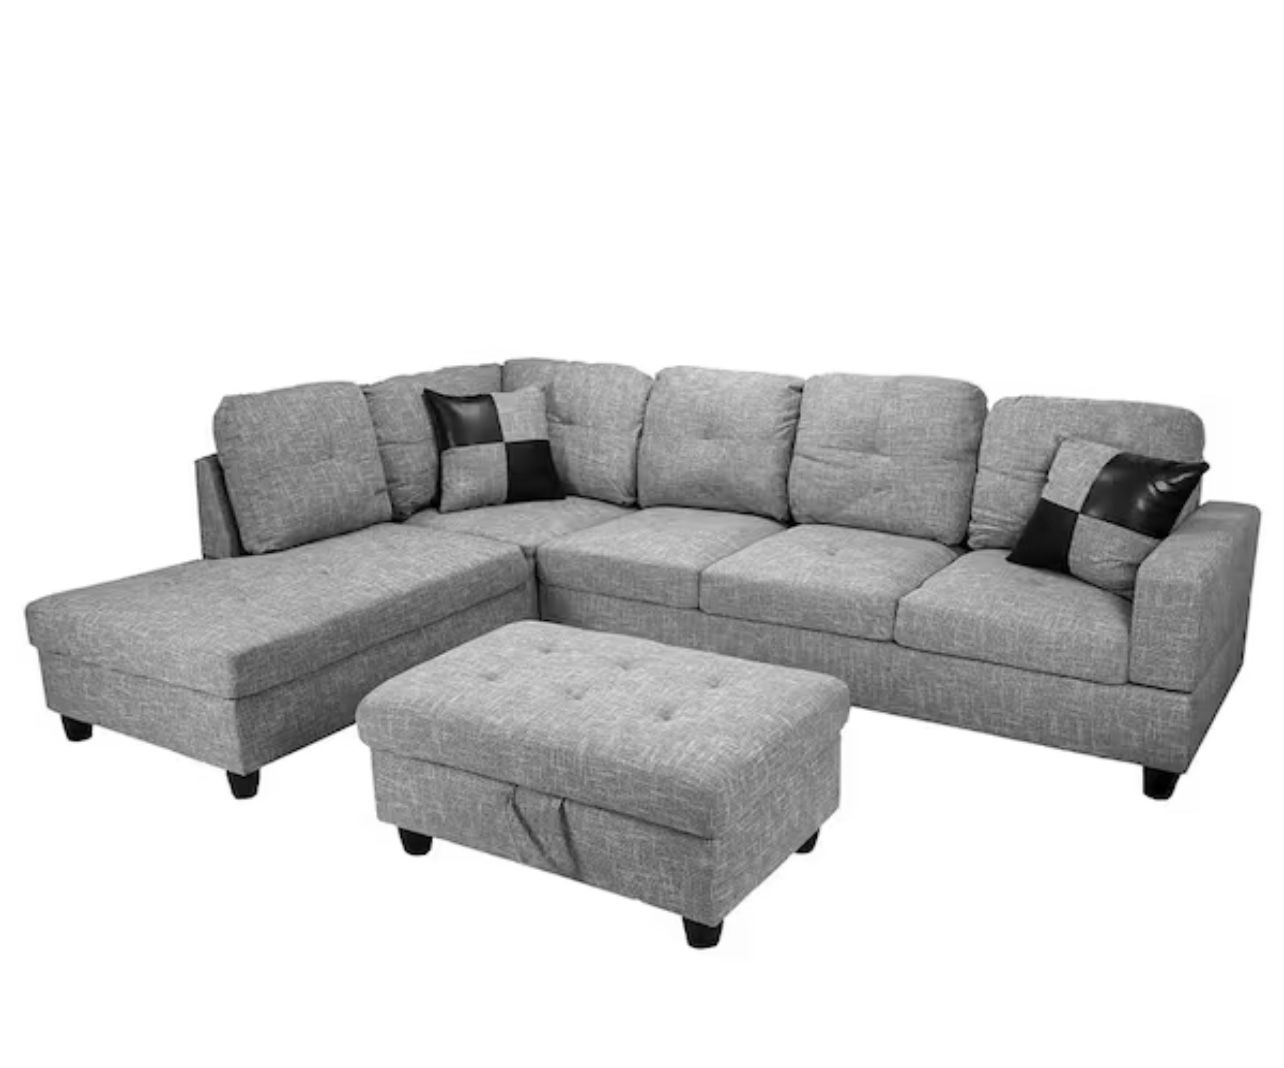 3-Piece Gray Linen L-Shaped Left-Facing Chaise Sectional Sofa with Ottoman